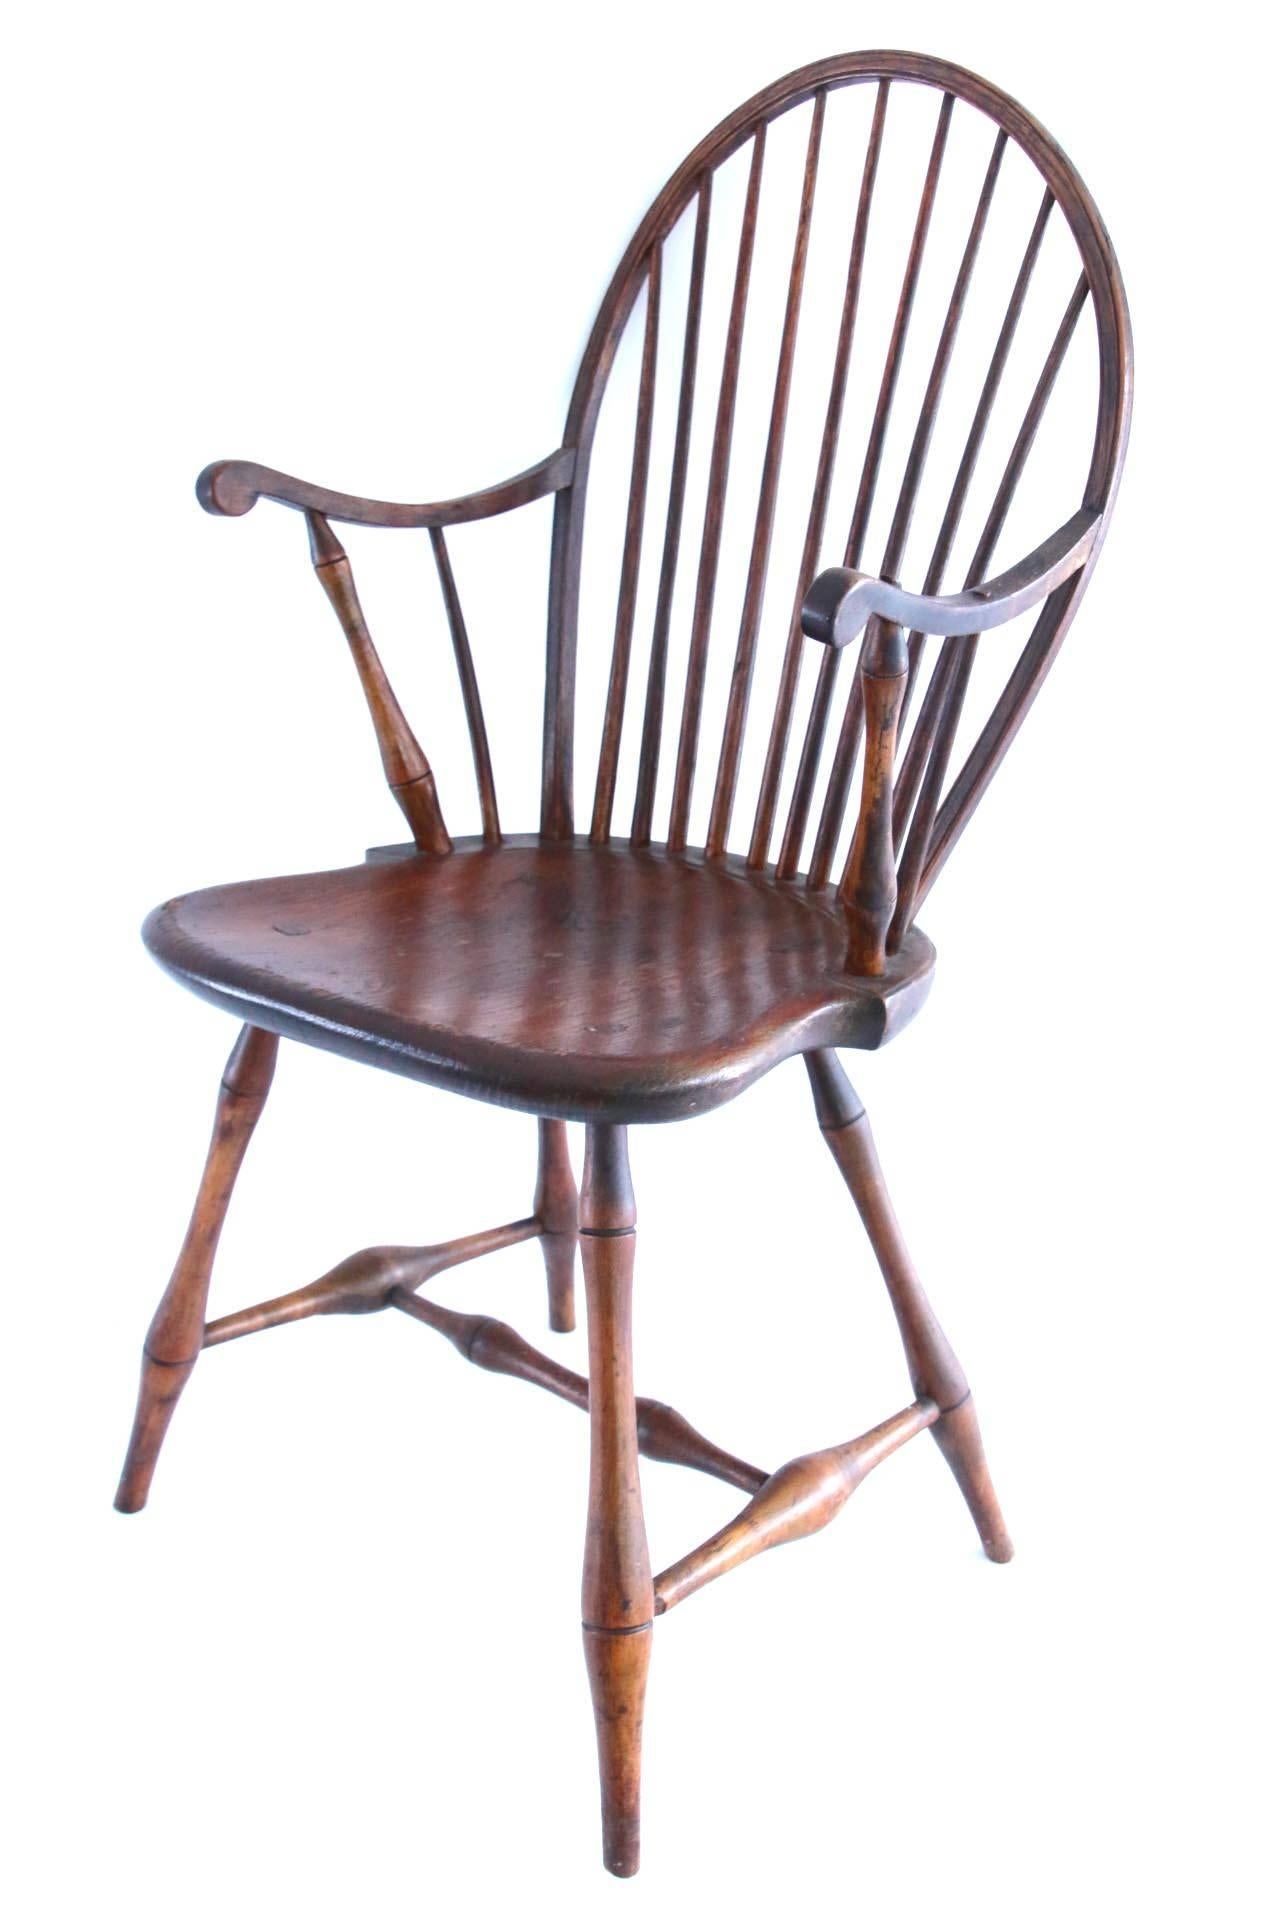 Bowback Windsor armchair with a bowed and incised rail centering a nine-spindle back joined to a shaped seat raised on splayed turned legs joined to a double swell H-form stretcher. 

Massachusetts or Rhode Island, circa 1790. 

Measures: 18 inch;